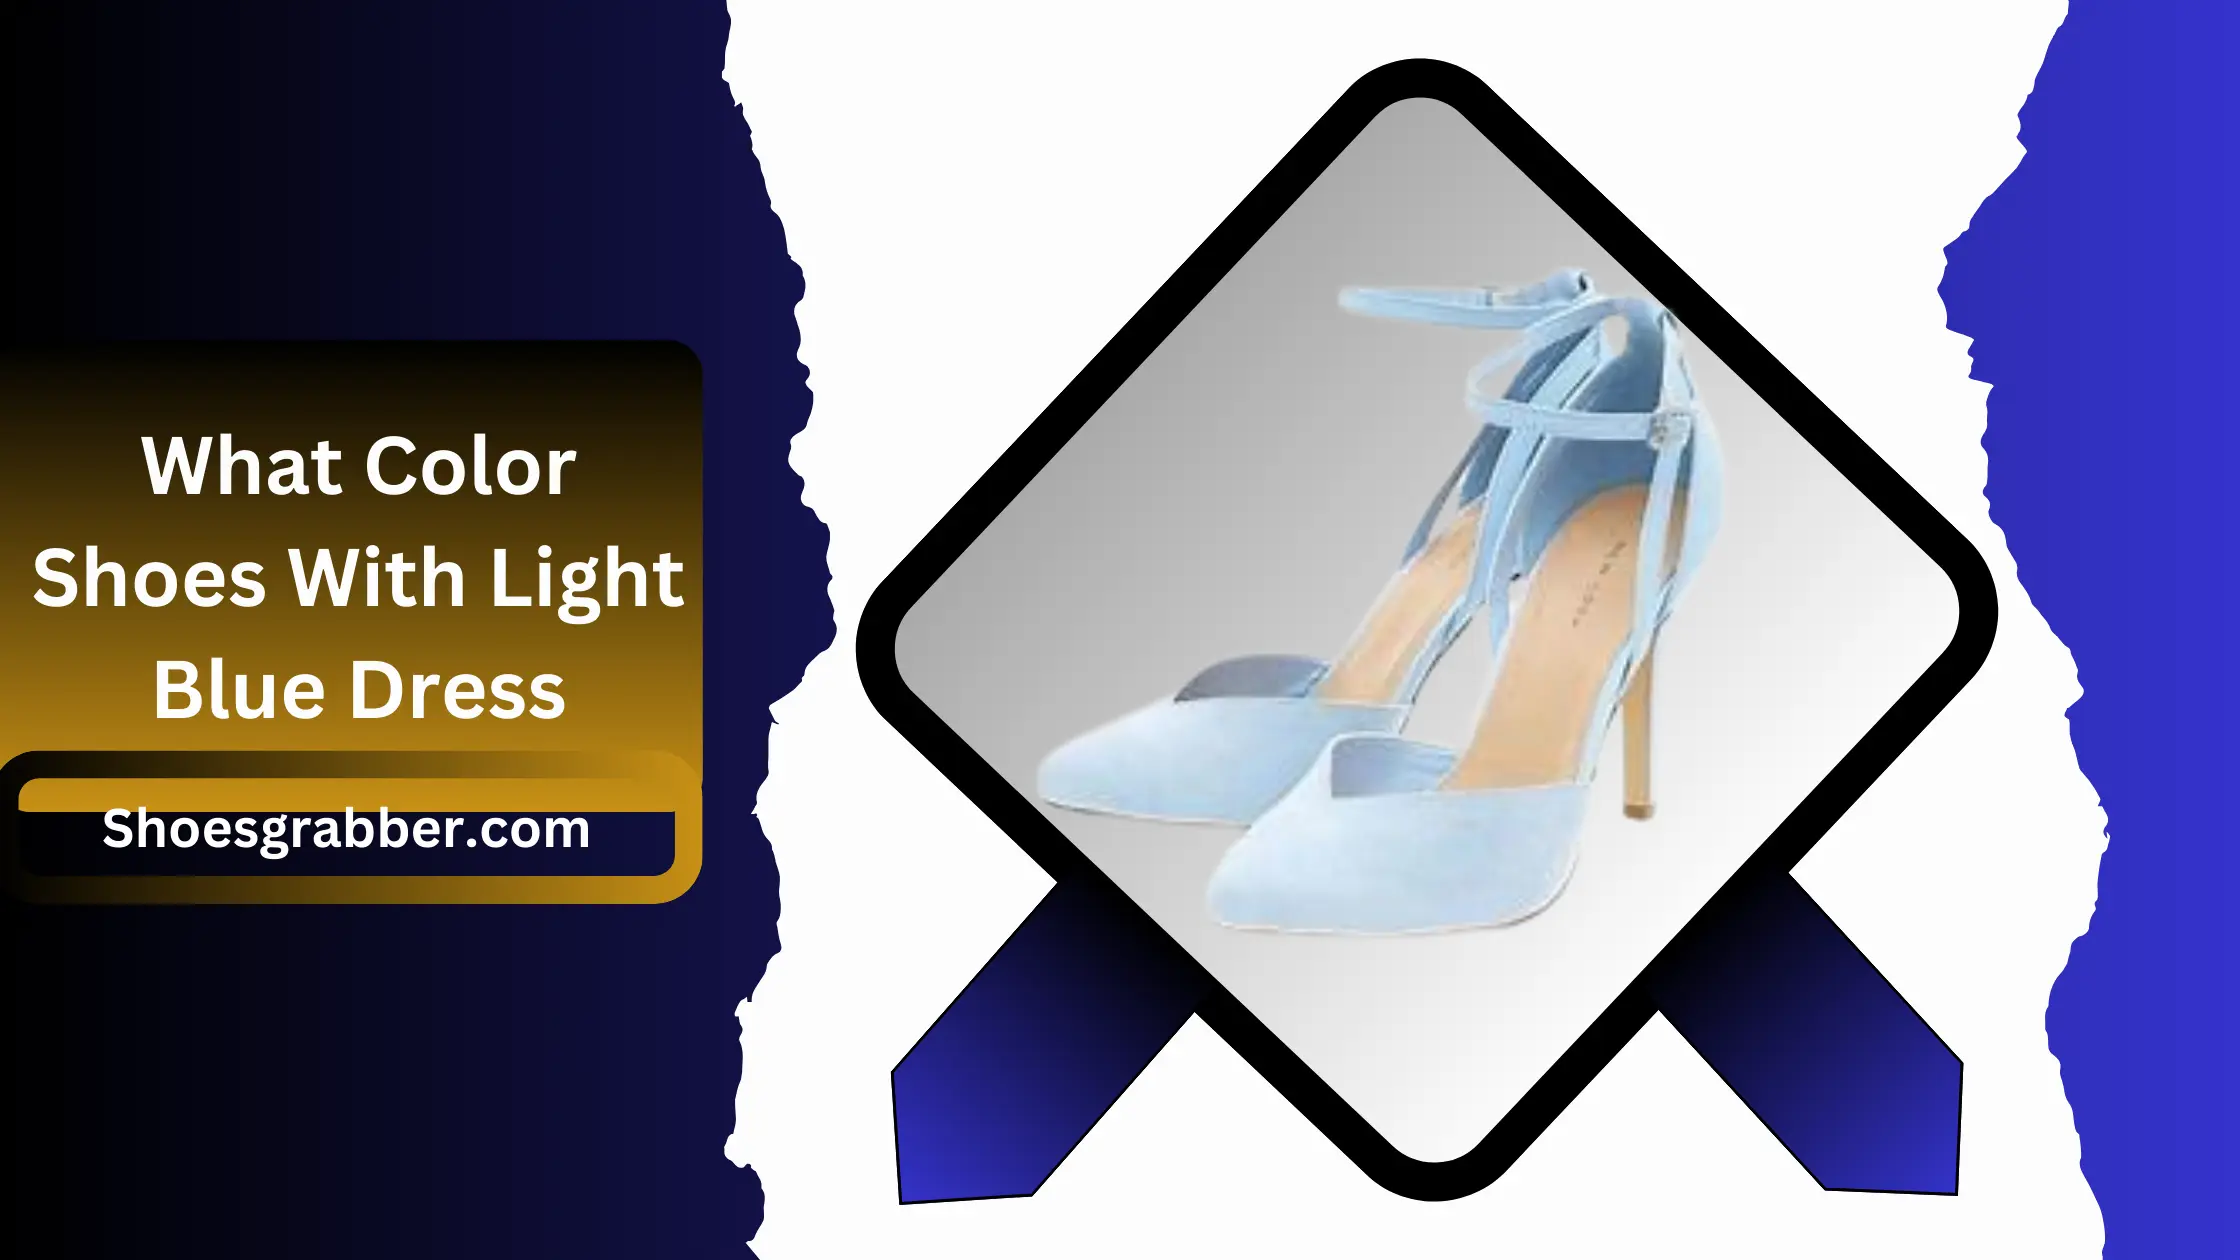 What Color Shoes With Light Blue Dress - The Perfect Combination